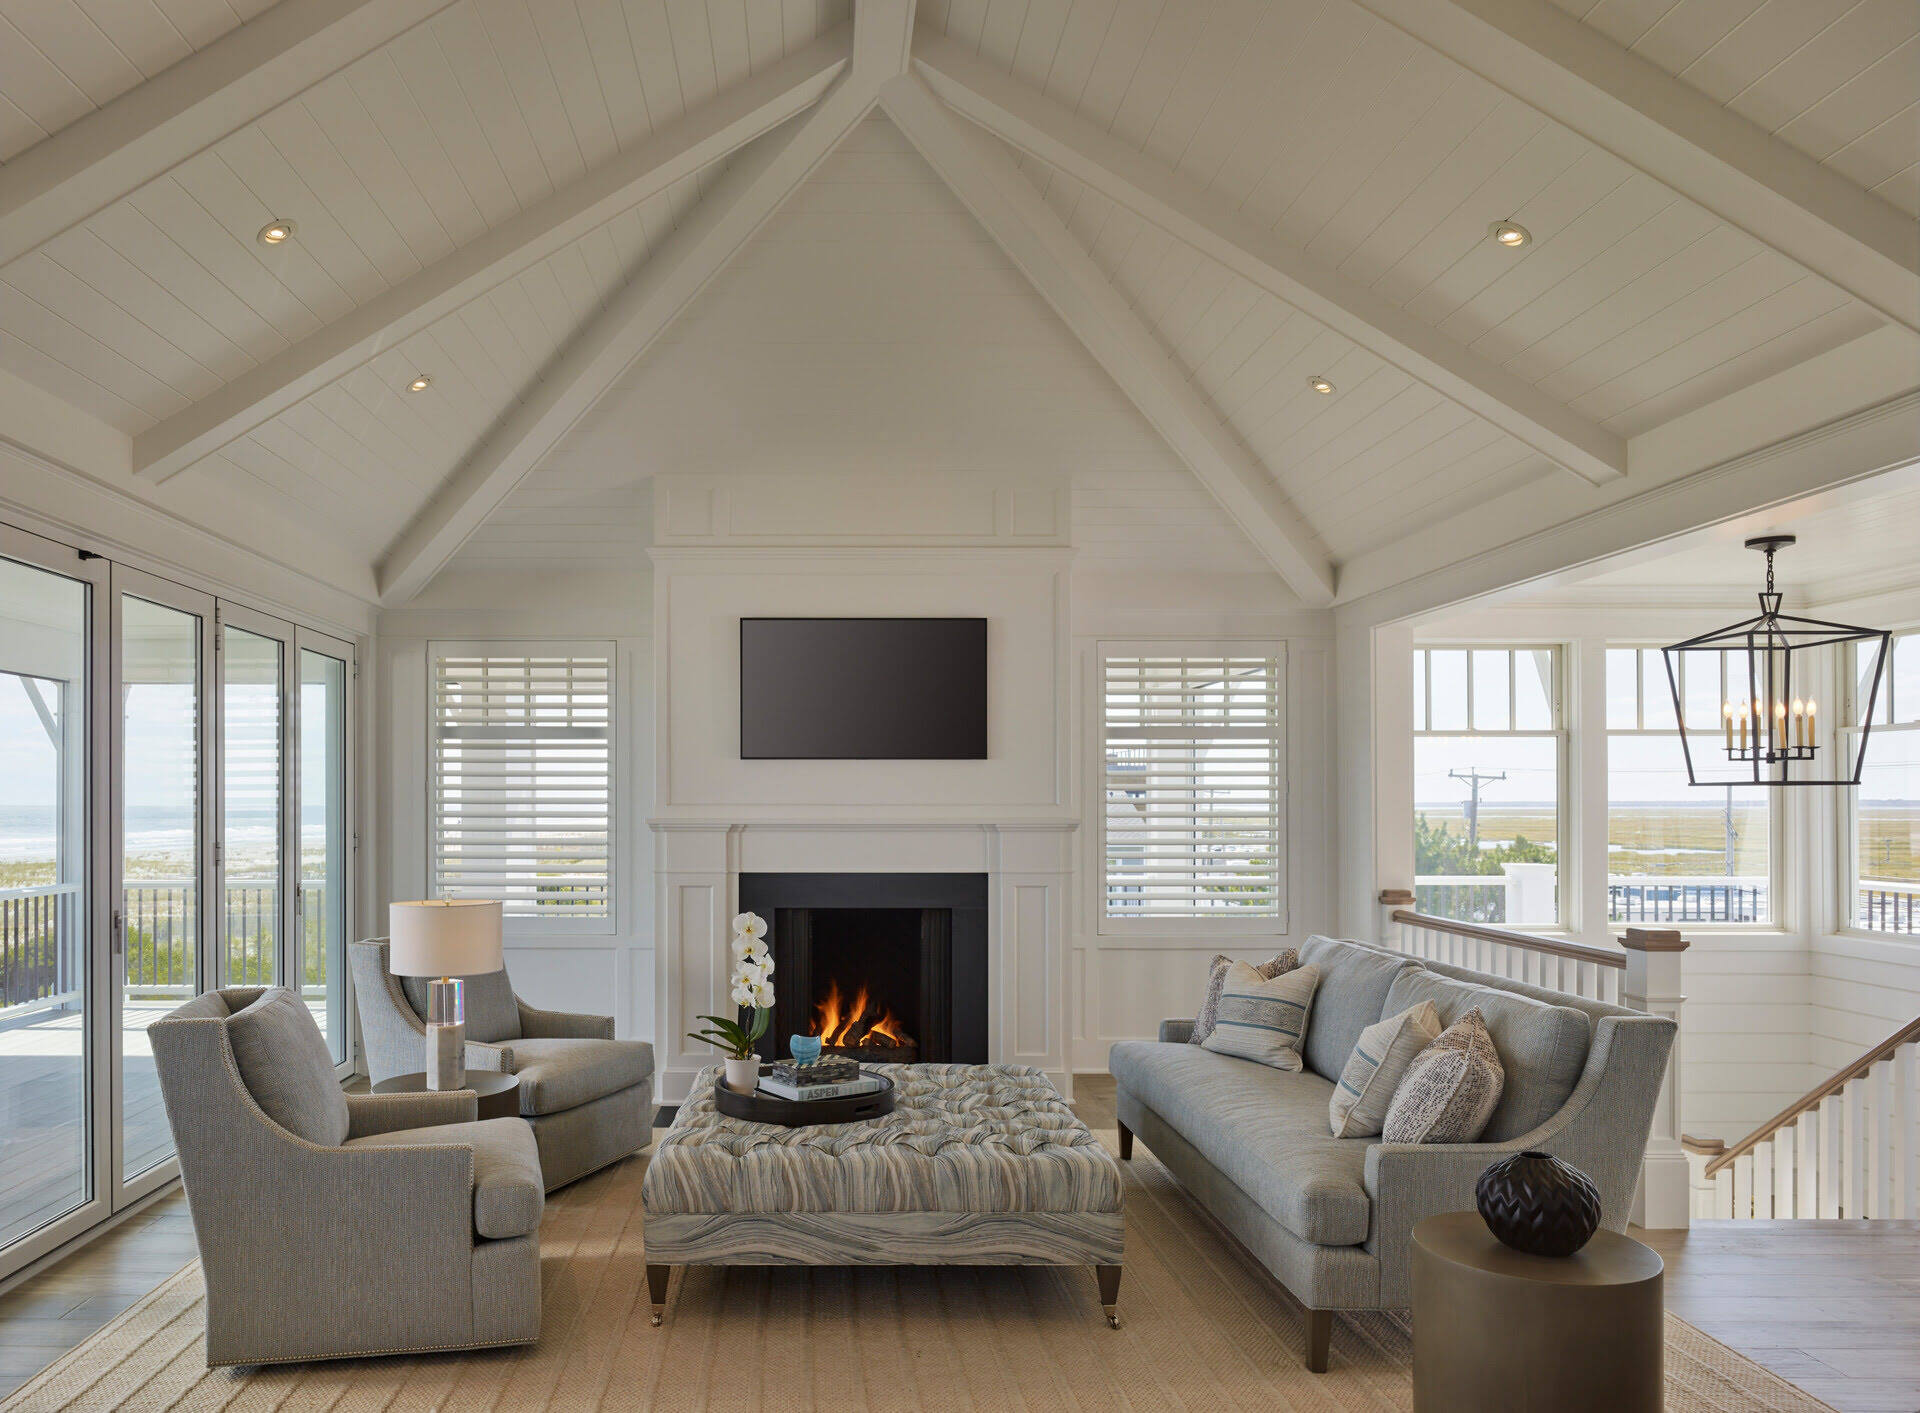 How To Decorate A Large Living Room Wall With Vaulted Ceilings